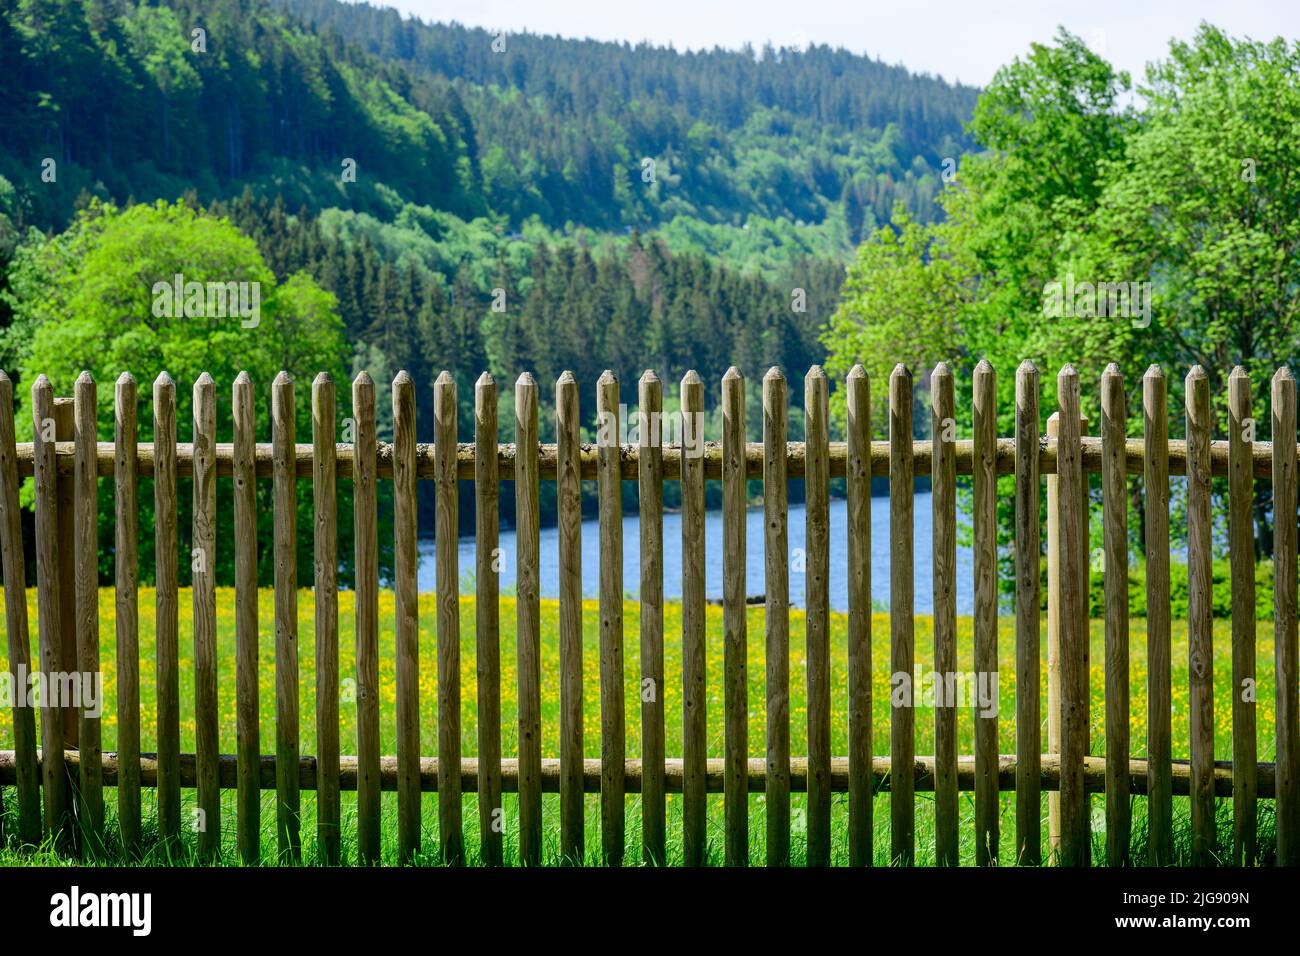 Germany, Baden-Württemberg, Black Forest, Titisee, old wooden picket fence at a meadow. Stock Photo